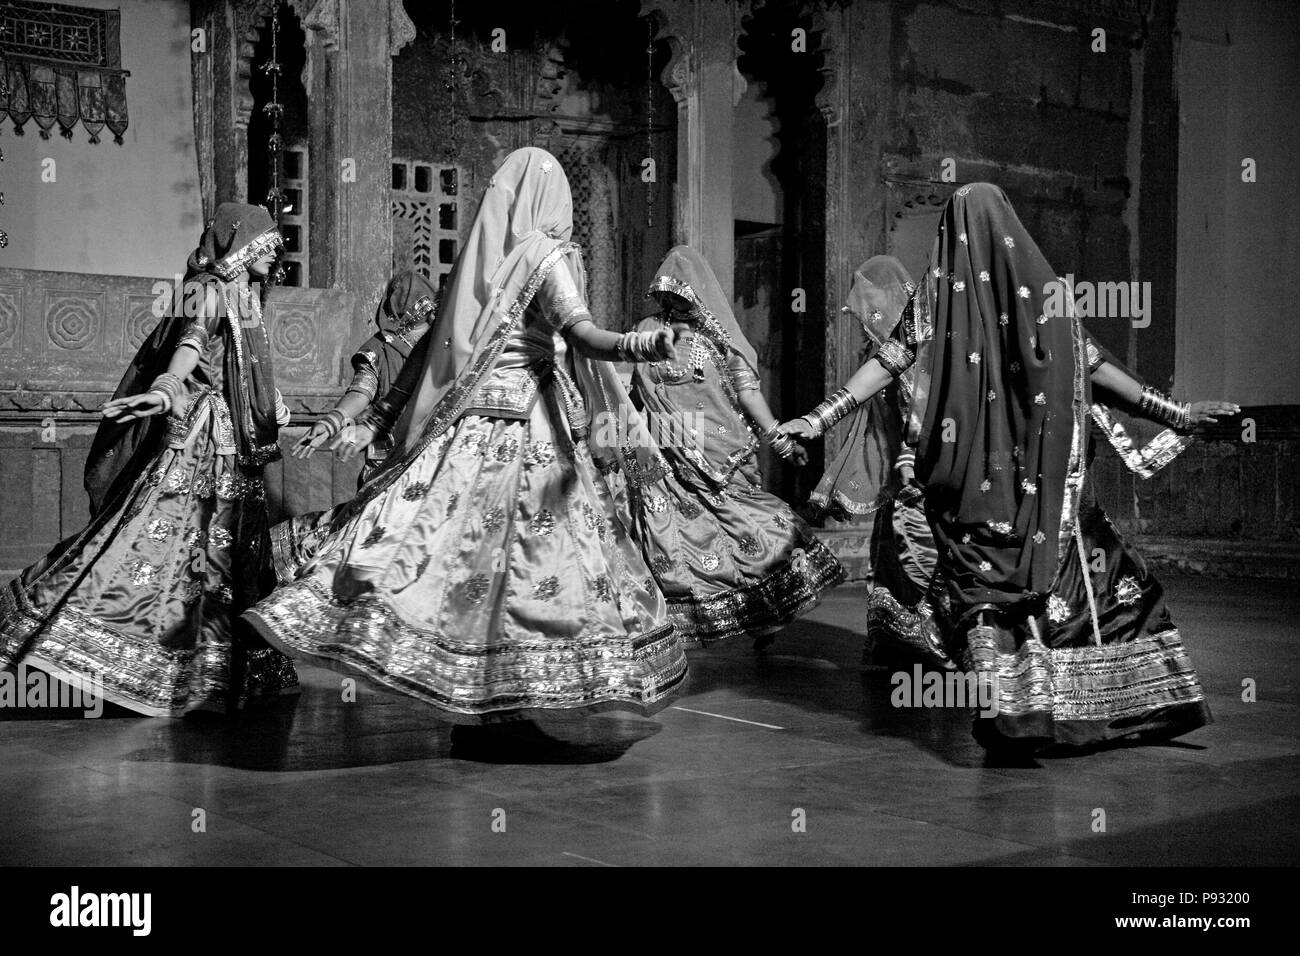 Rajasthani women perform a traditional DANCE in their colorful silk dresses at the BAGORE KI HAVELI in UDAIPUR - RAJASTHAN, INDIA Stock Photo